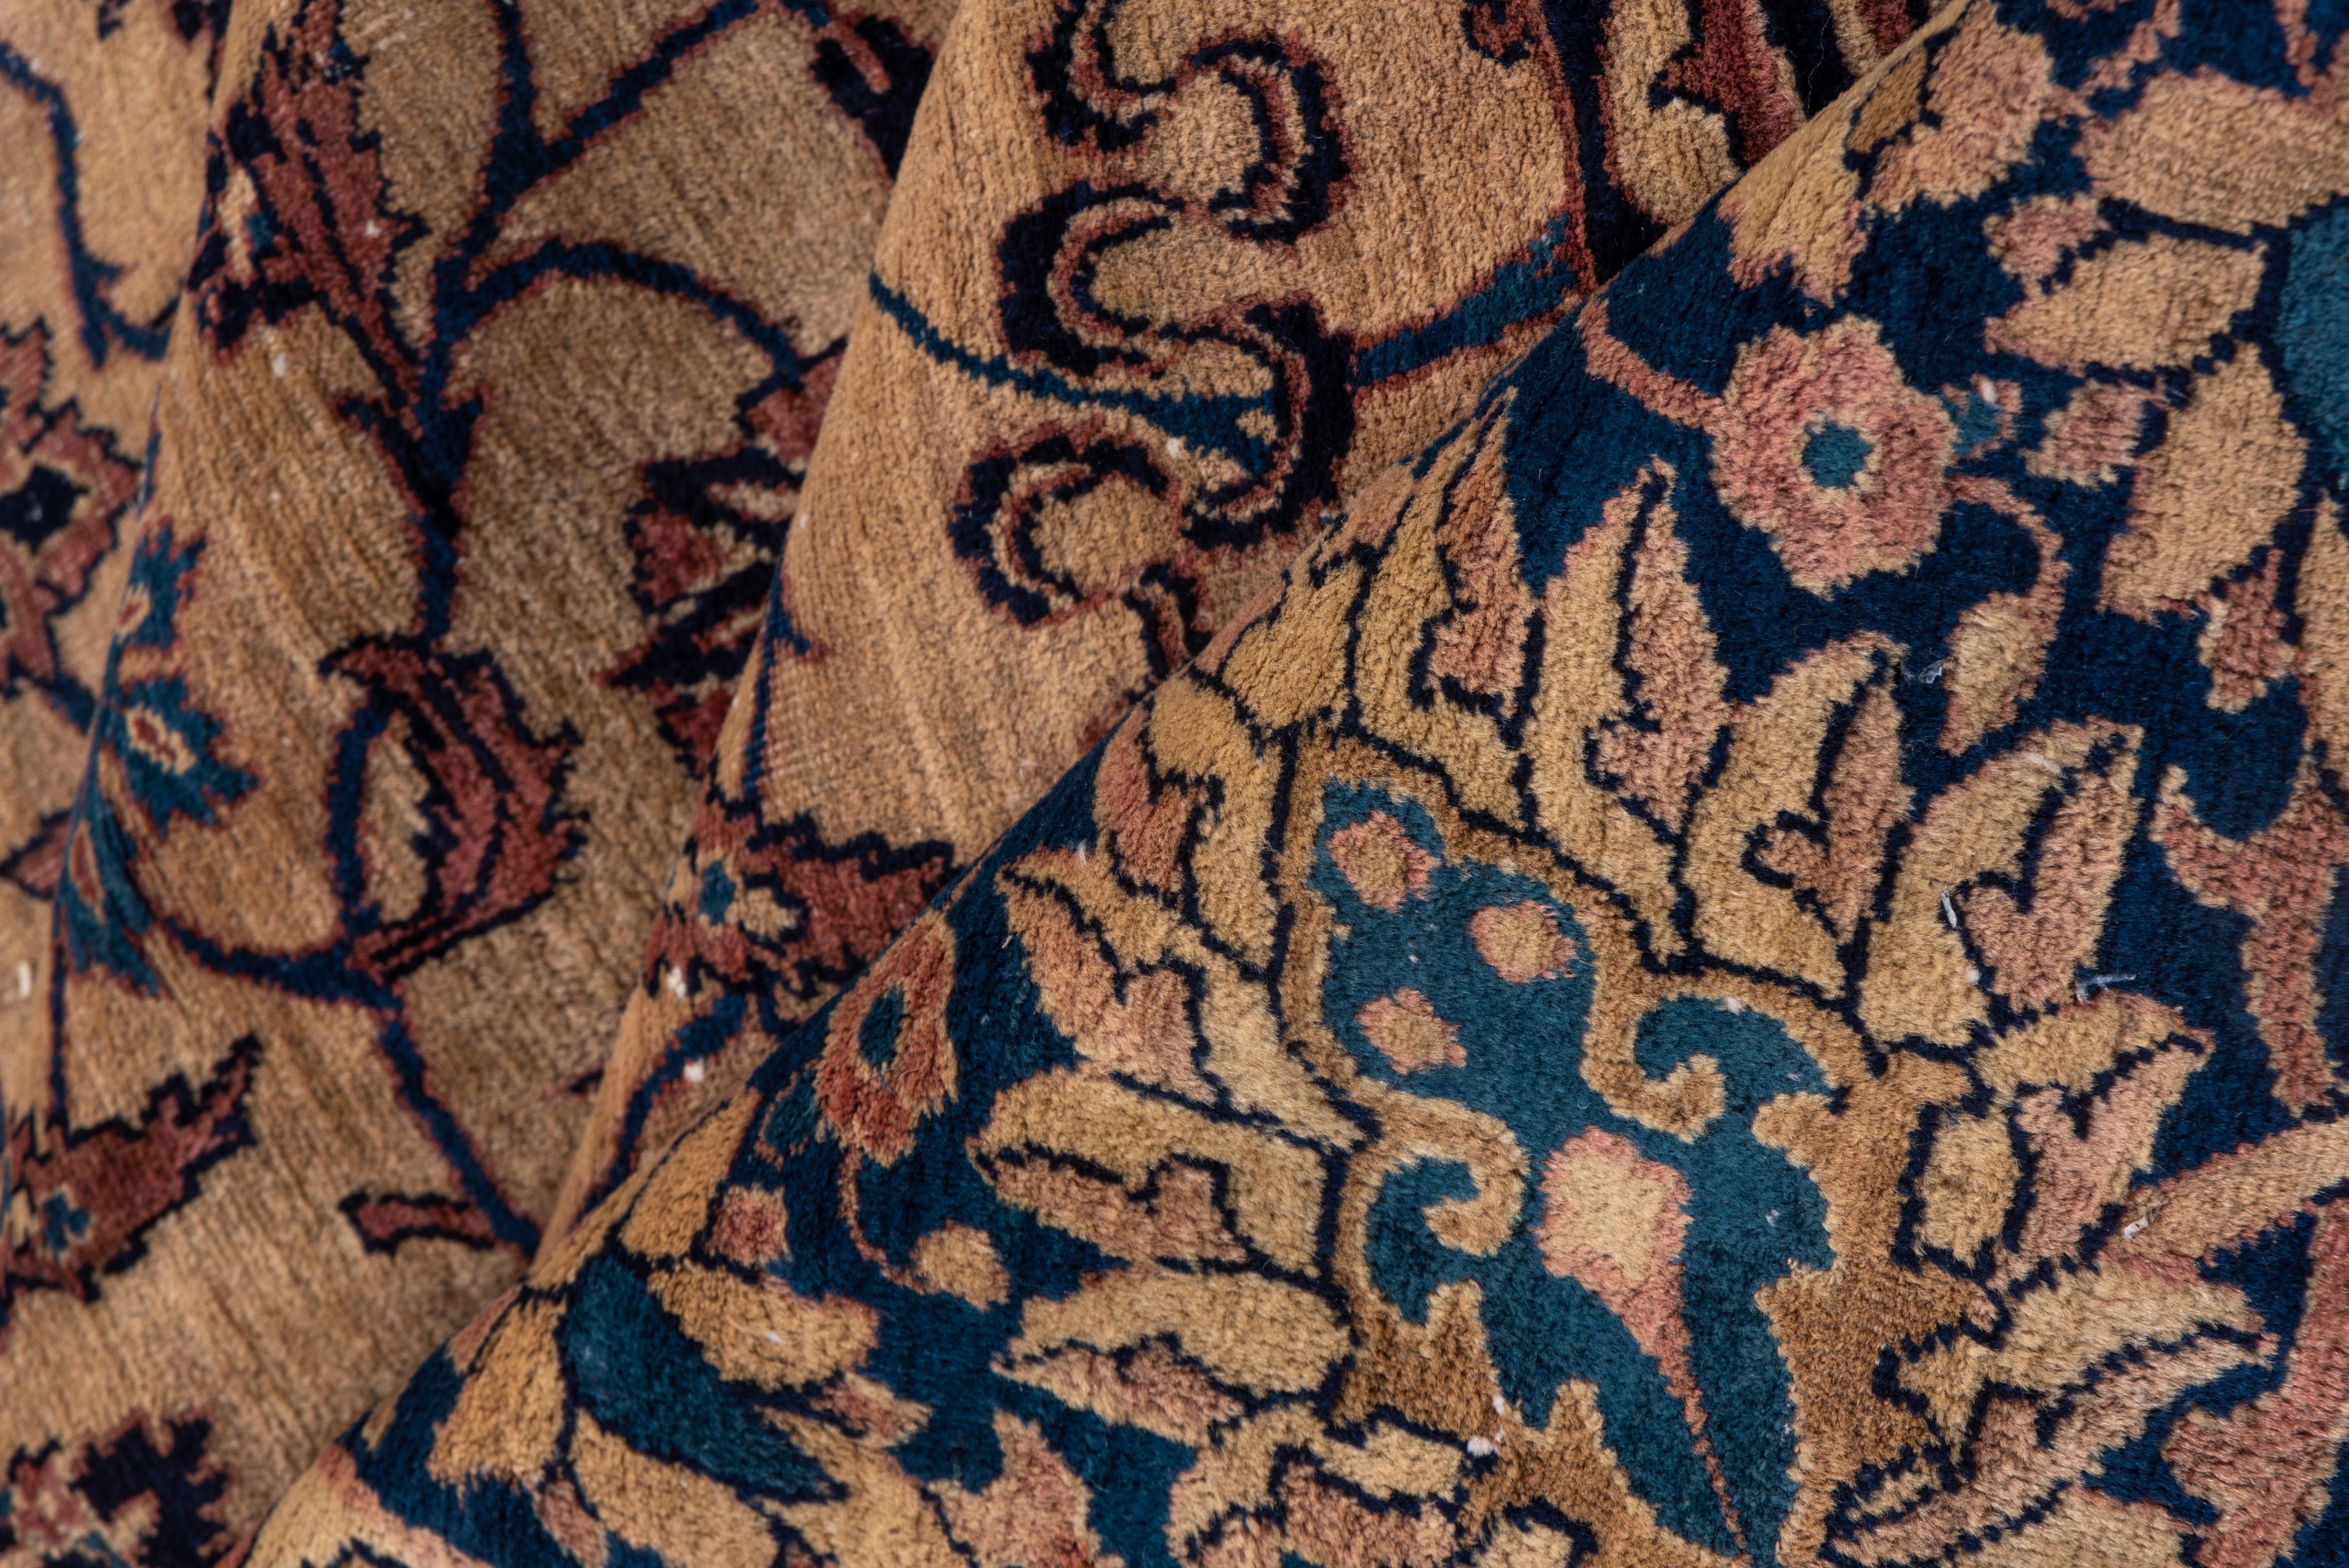 Made for the European market, this west Persian village carpet in an urban style shows a cream field with a finely detailed palmette, vine and cloud band design in shades of lighter blue, framed by a royal blue palmette and vermiculate cloud band